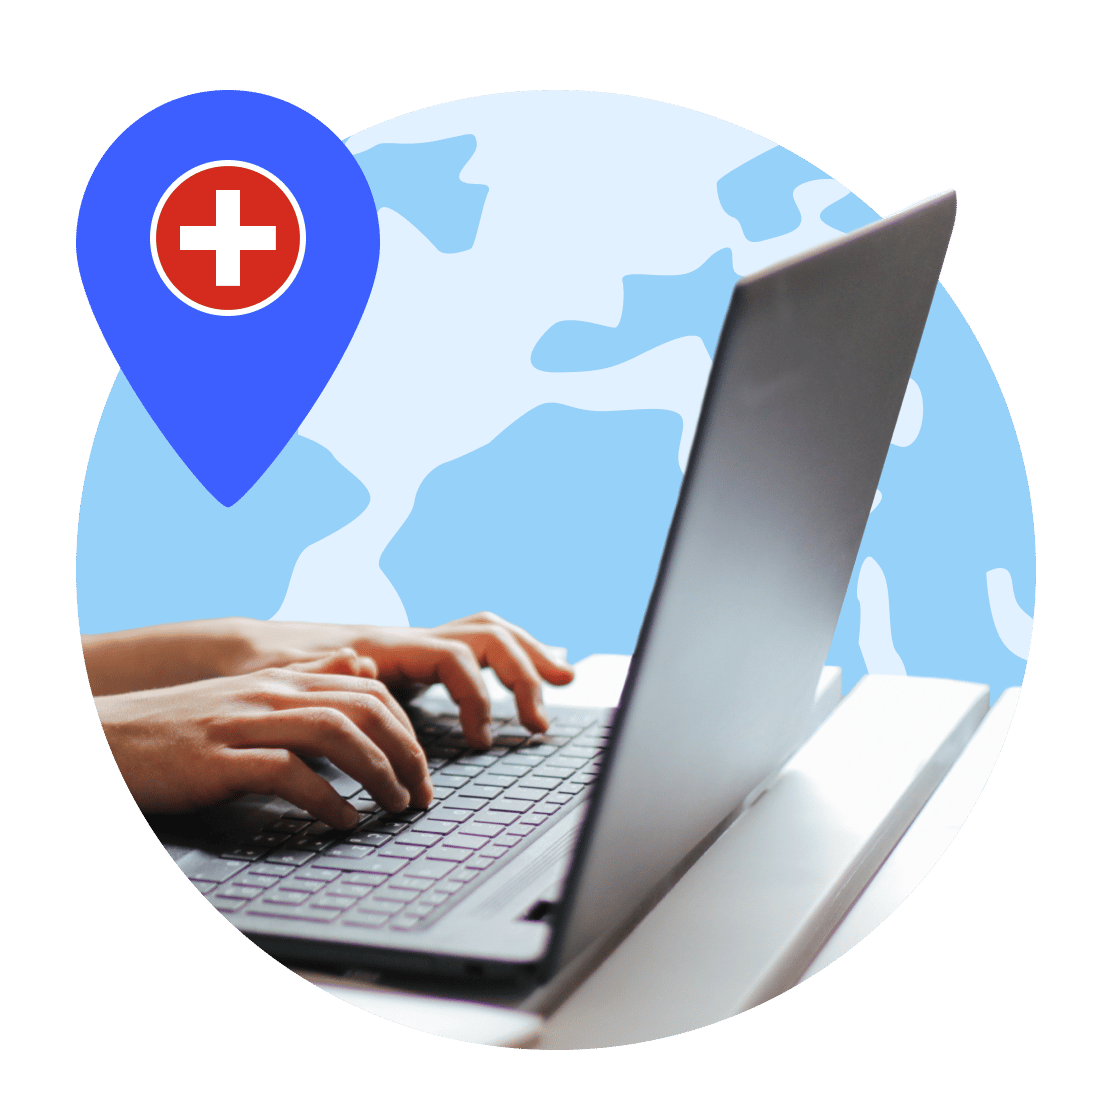 Connect to Swiss VPN servers and browse safely.